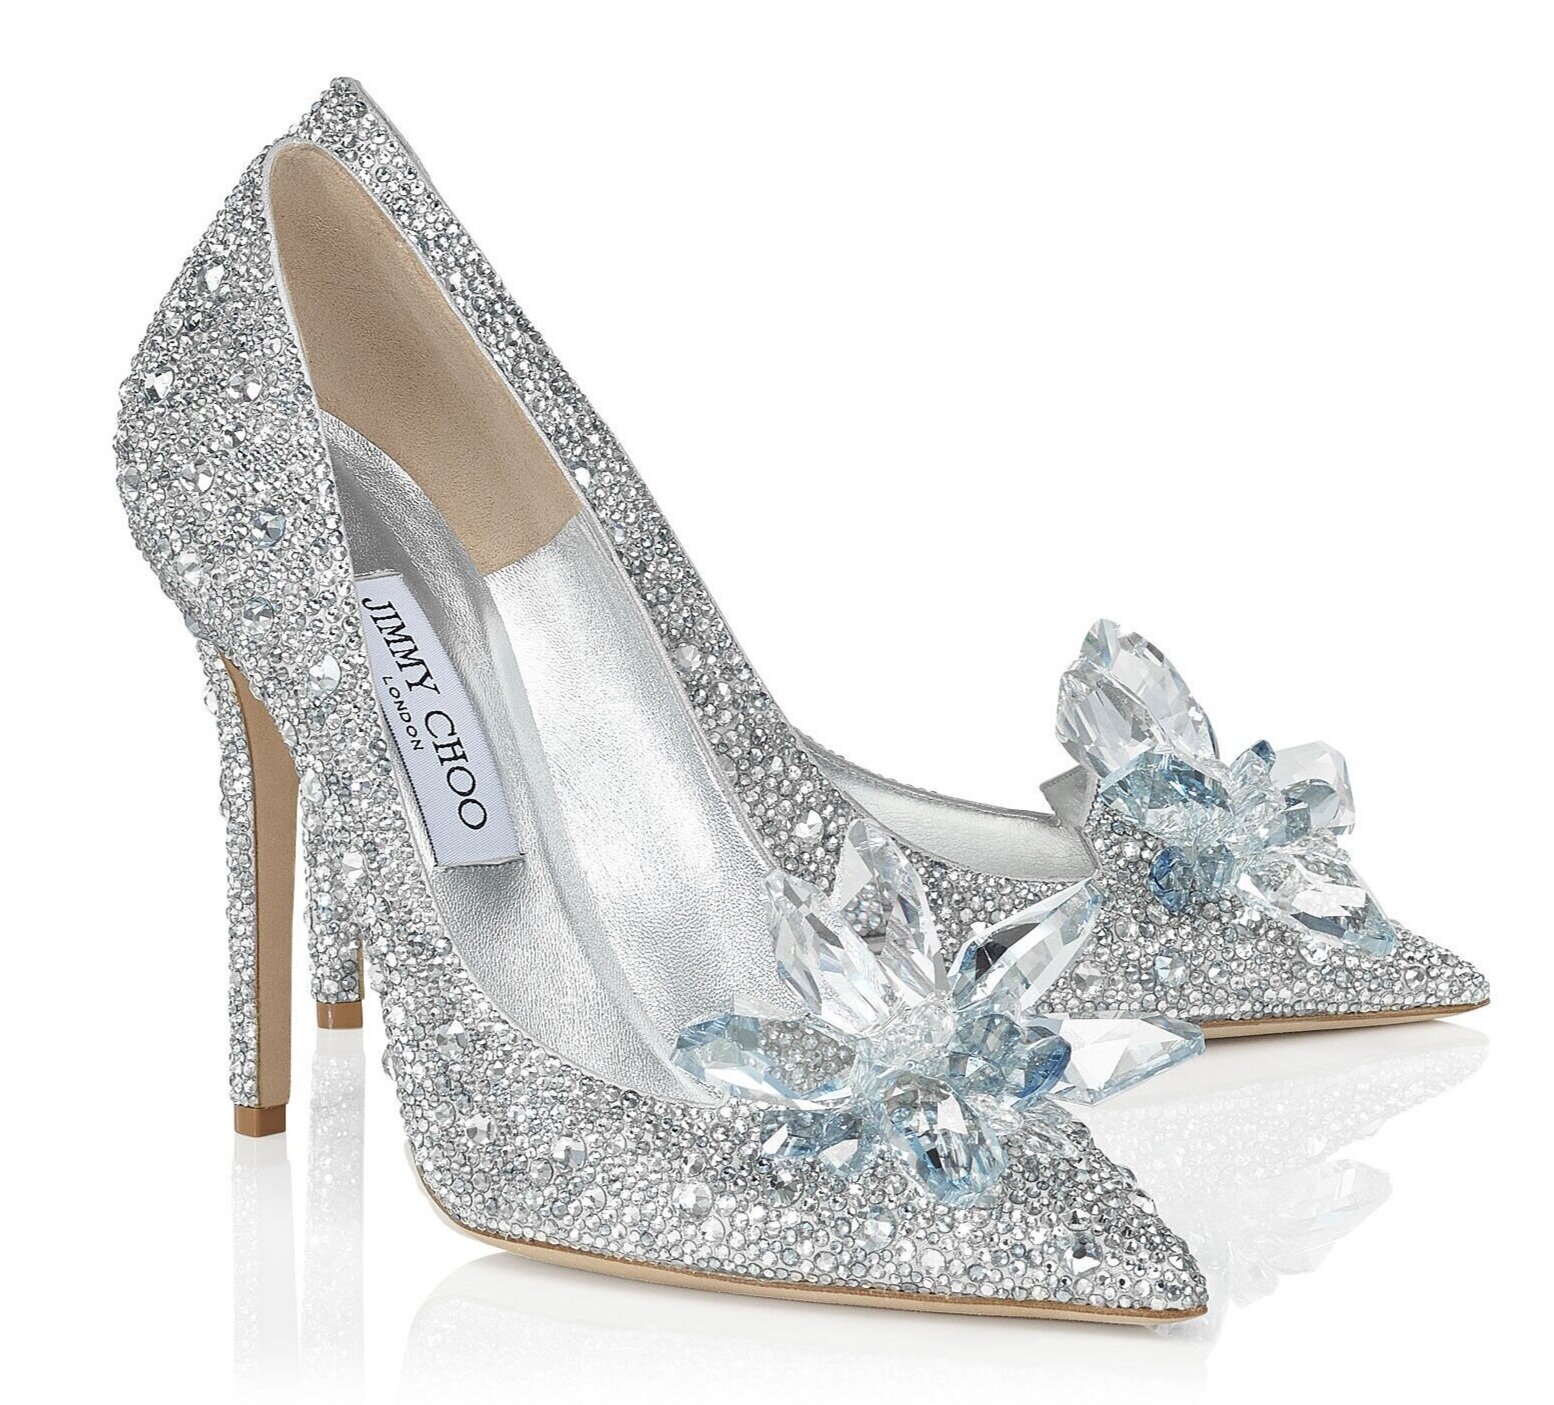 Jimmy Choo, Christian Louboutin and others create Cinderella's